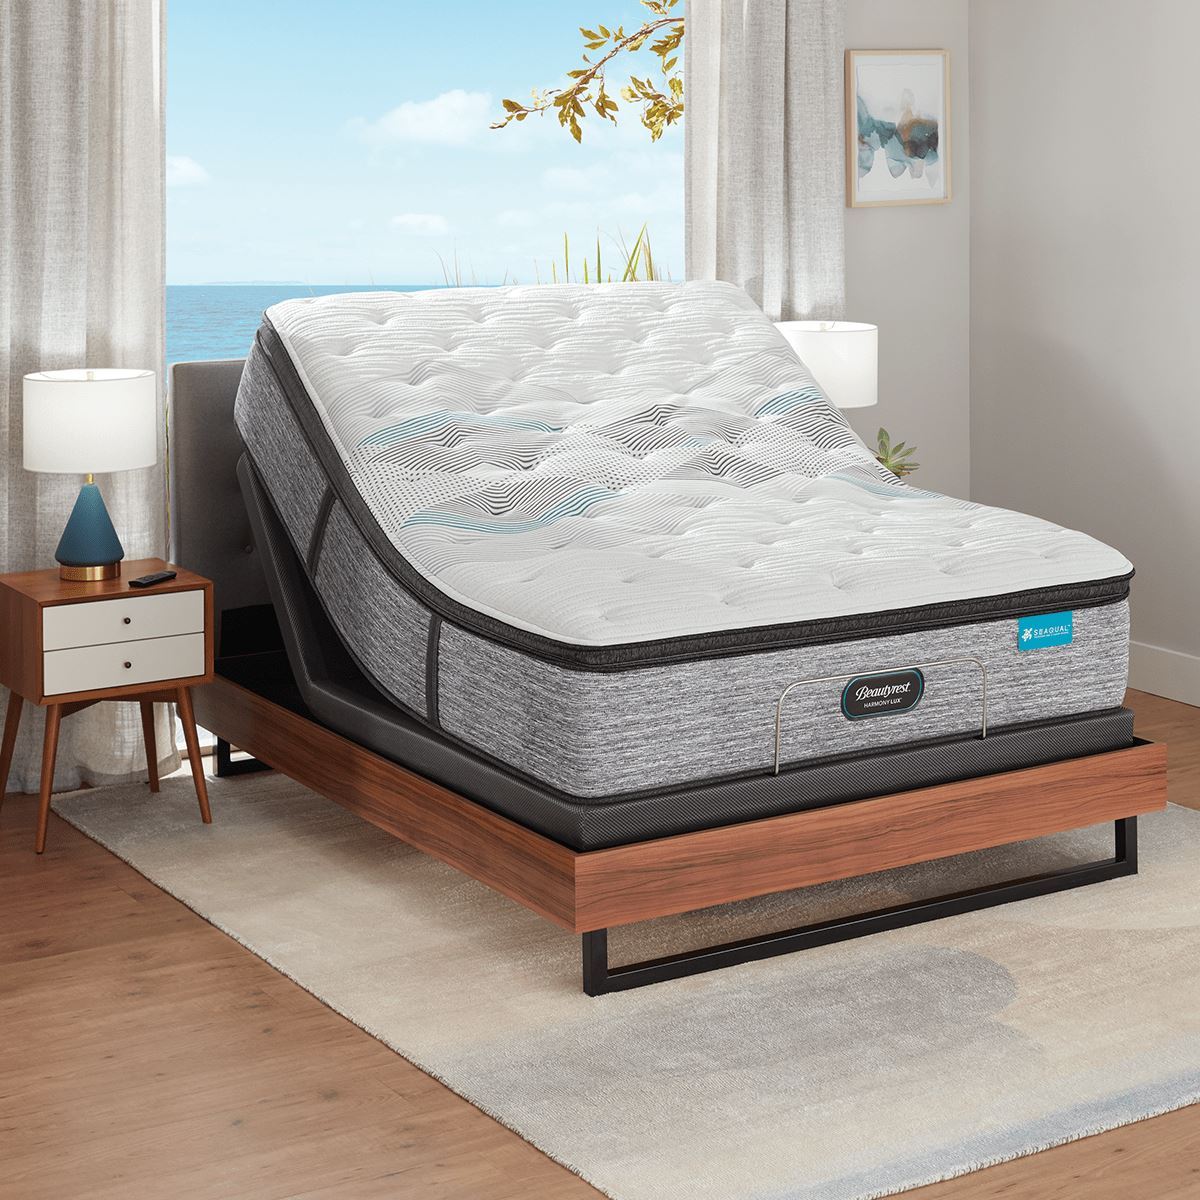 Beautyrest Harmony Lux Carbon Plush Pillowtop Mattress In Bedroom On Adjustable Base